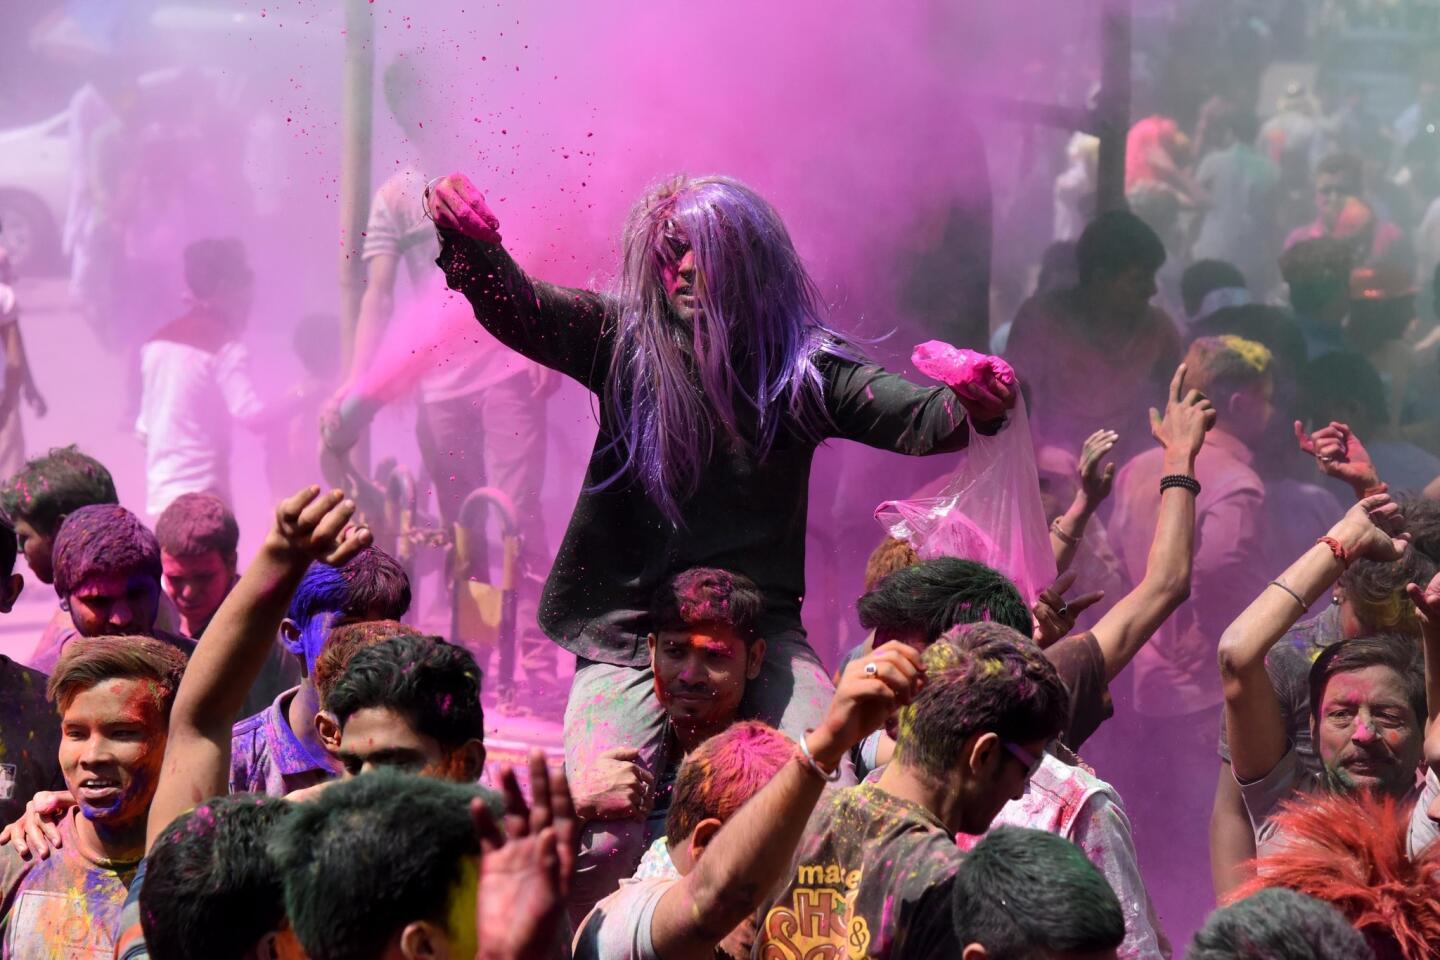 People dance as color is sprayed around during Holi on March 13, 2017, in Guwahati, India. Holi, also known as the Festival of Colors, heralds the beginning of spring and is celebrated all over India.